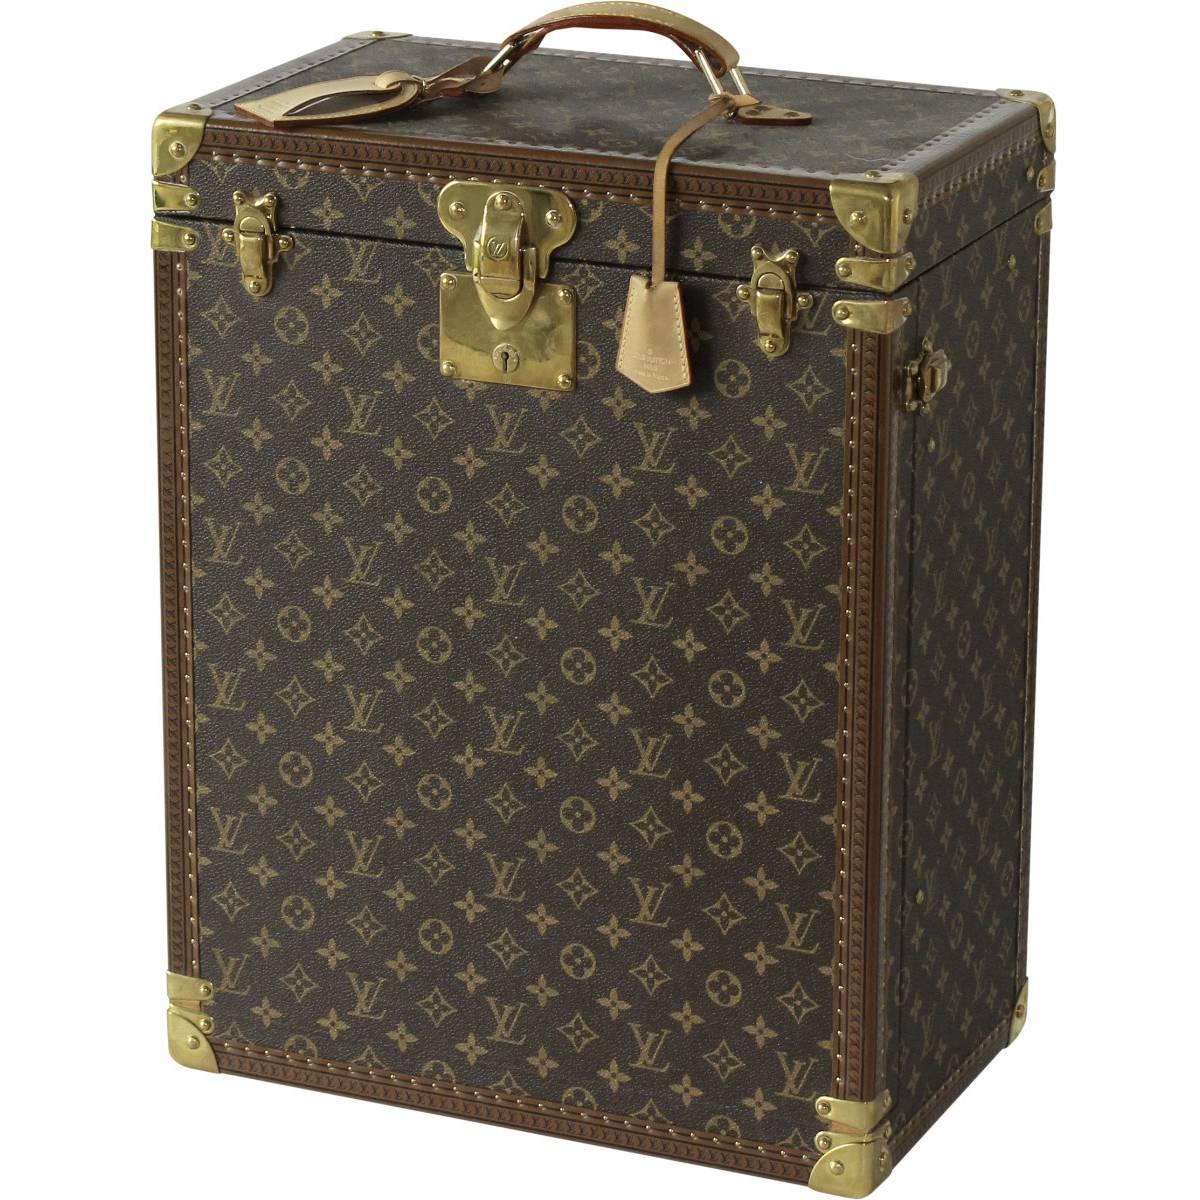 Custom-Made Louis Vuitton Jewellery and Watch Trunk For Sale at 1stdibs